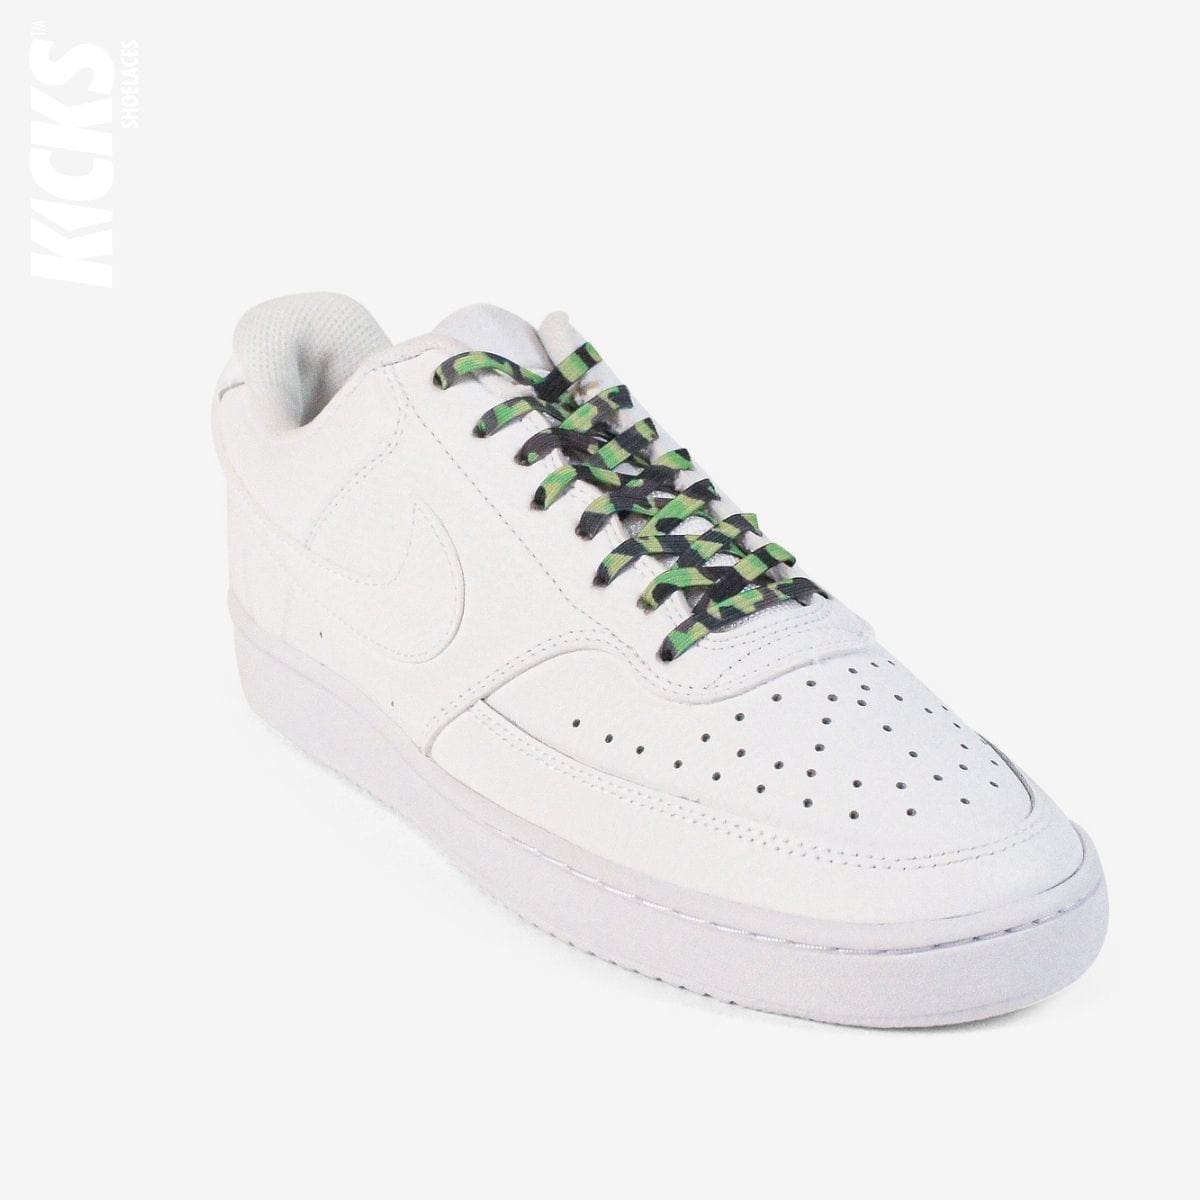 elastic-no-tie-shoelaces-with-green-camo-laces-on-nike-white-sneakers